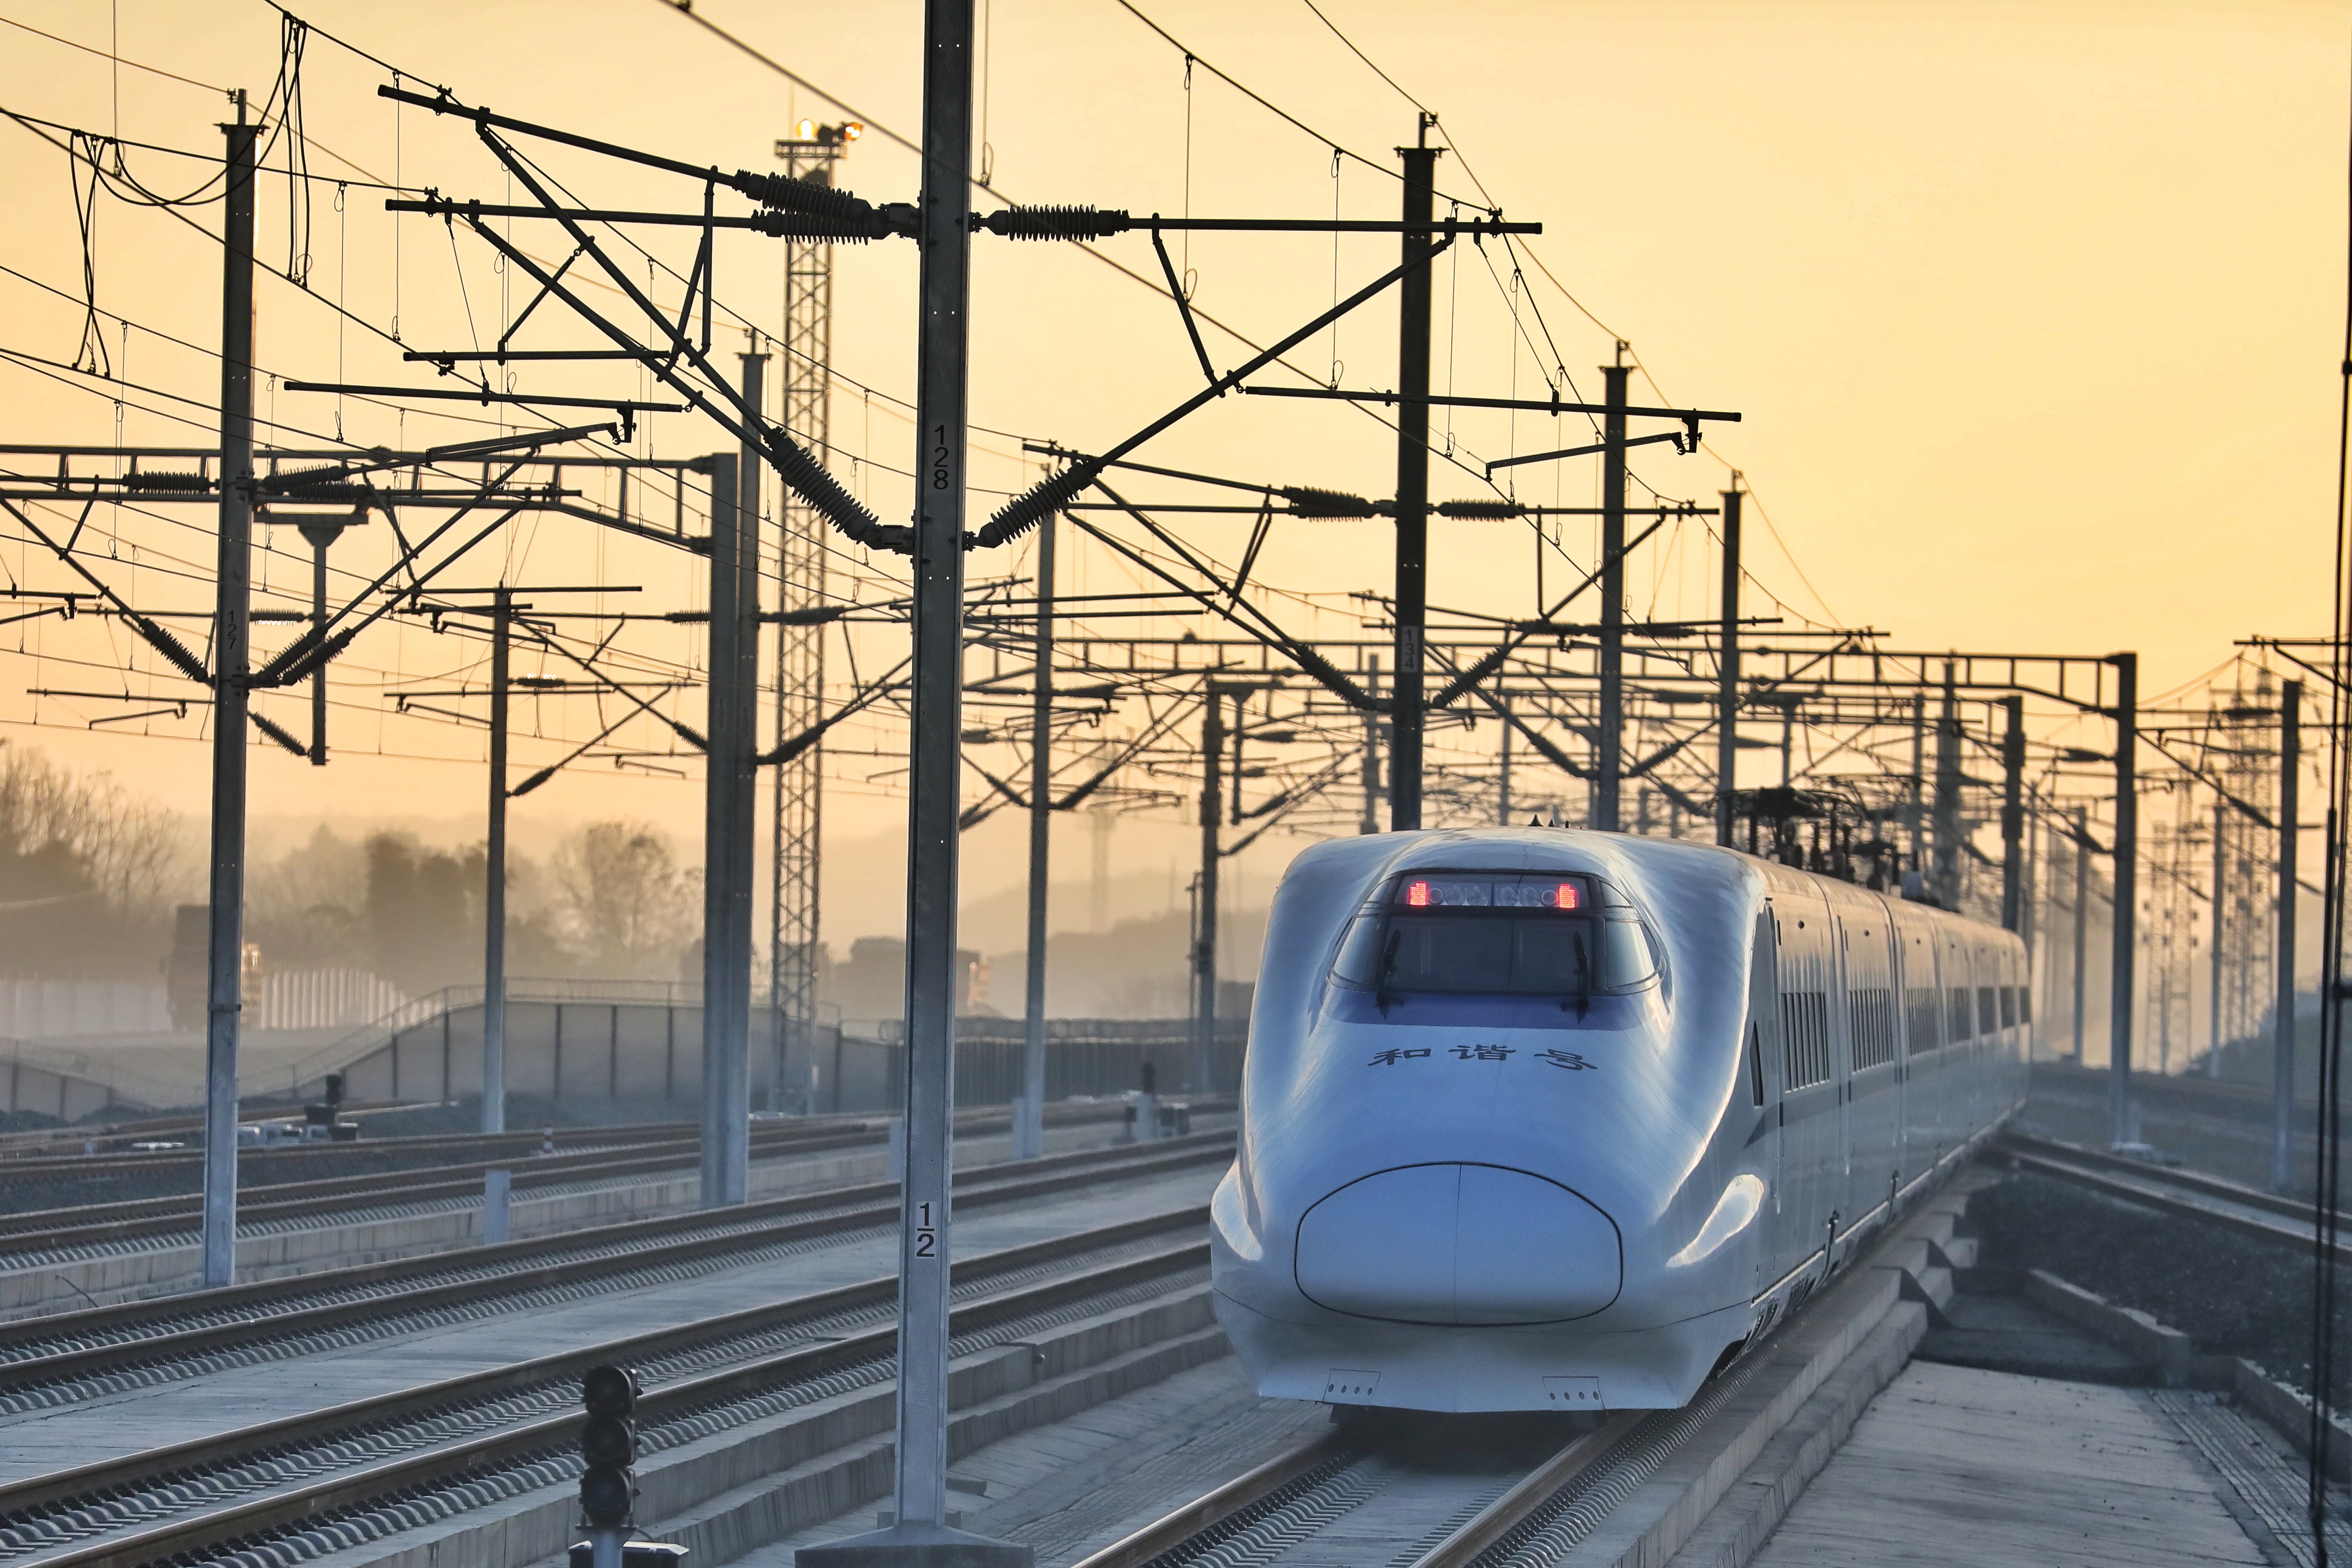 High-speed rail connects major cities in southwest China